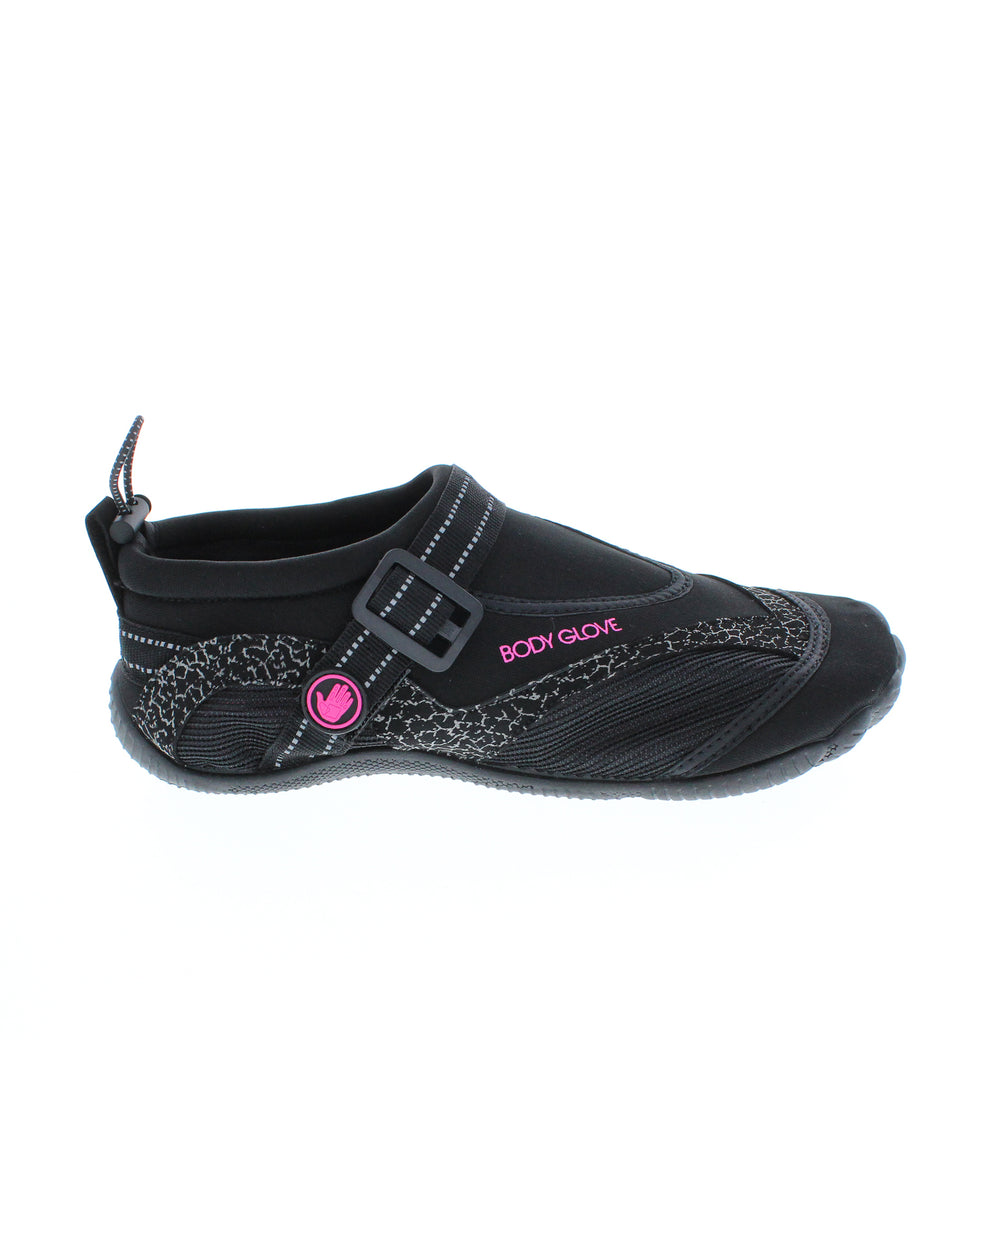 Women's Current Water Shoes - Black